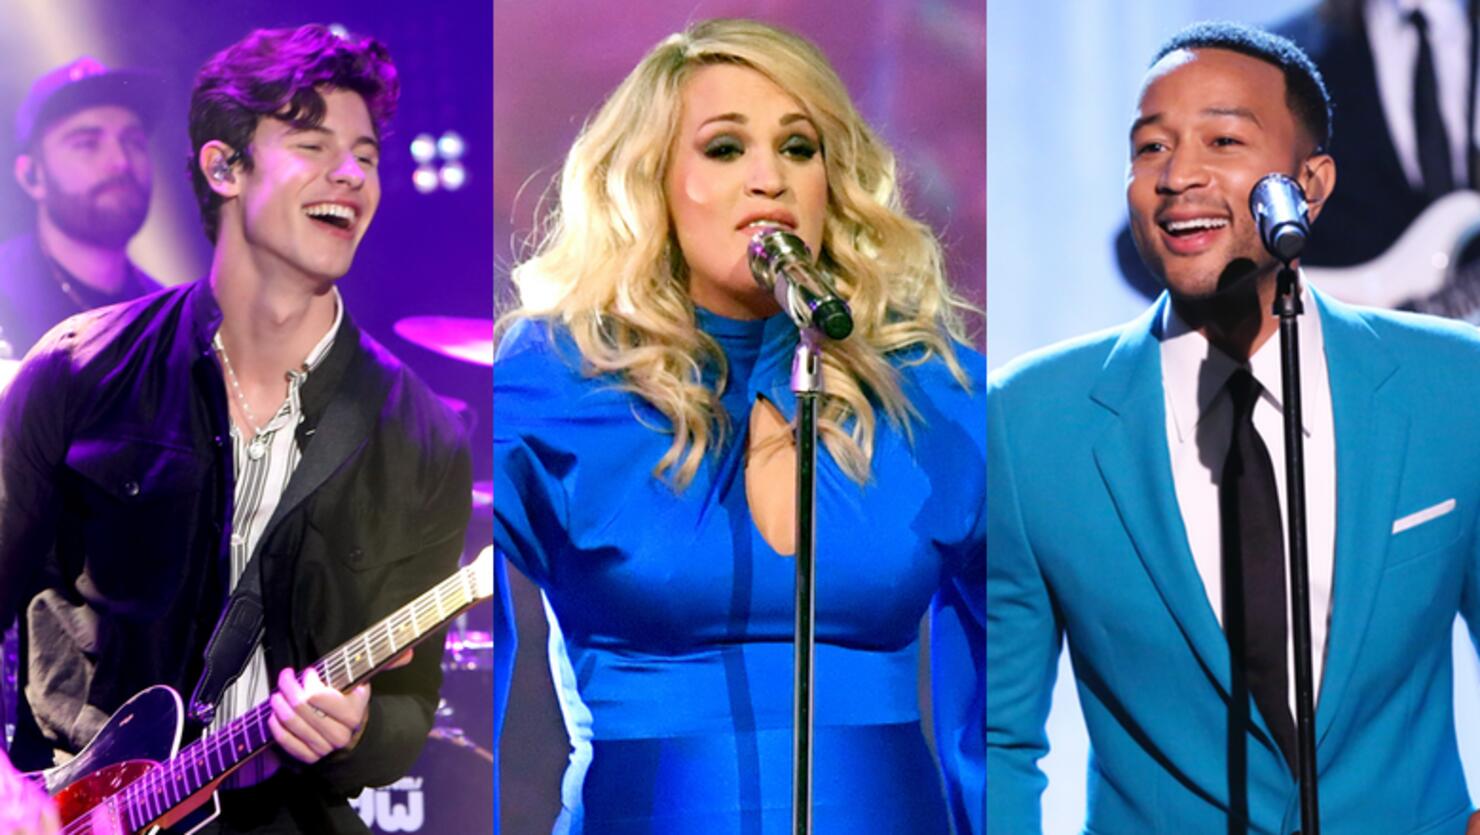 Elvis All-Star Tribute: Shawn Mendes, Carrie Underwood & More To Perform